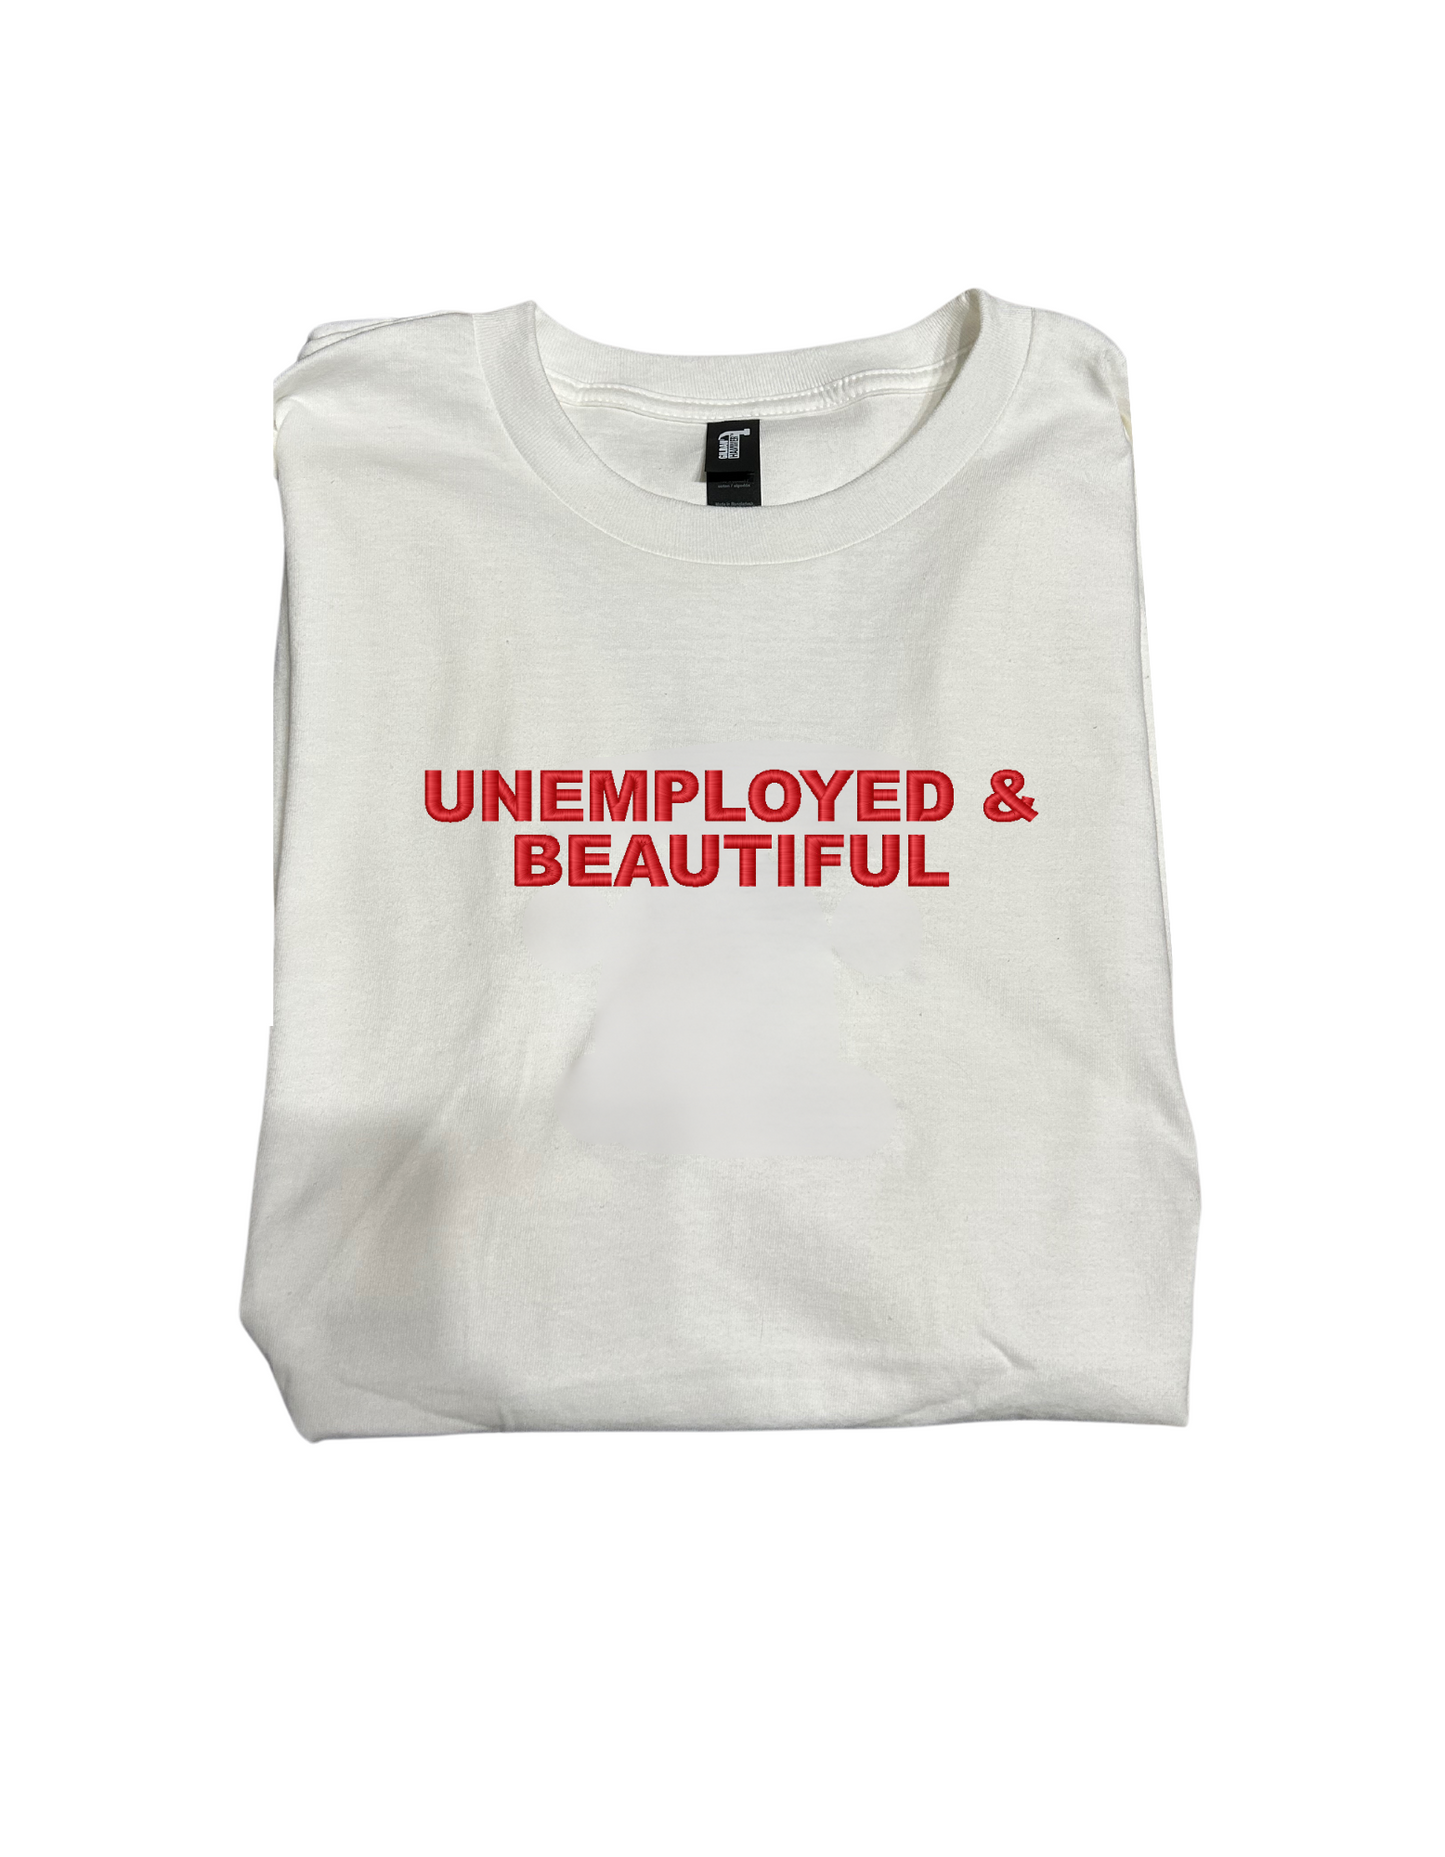 Embroidered 'Unemployed & Beautiful' T-Shirt, Short Sleeve, Classic fit, Unisex, Adult